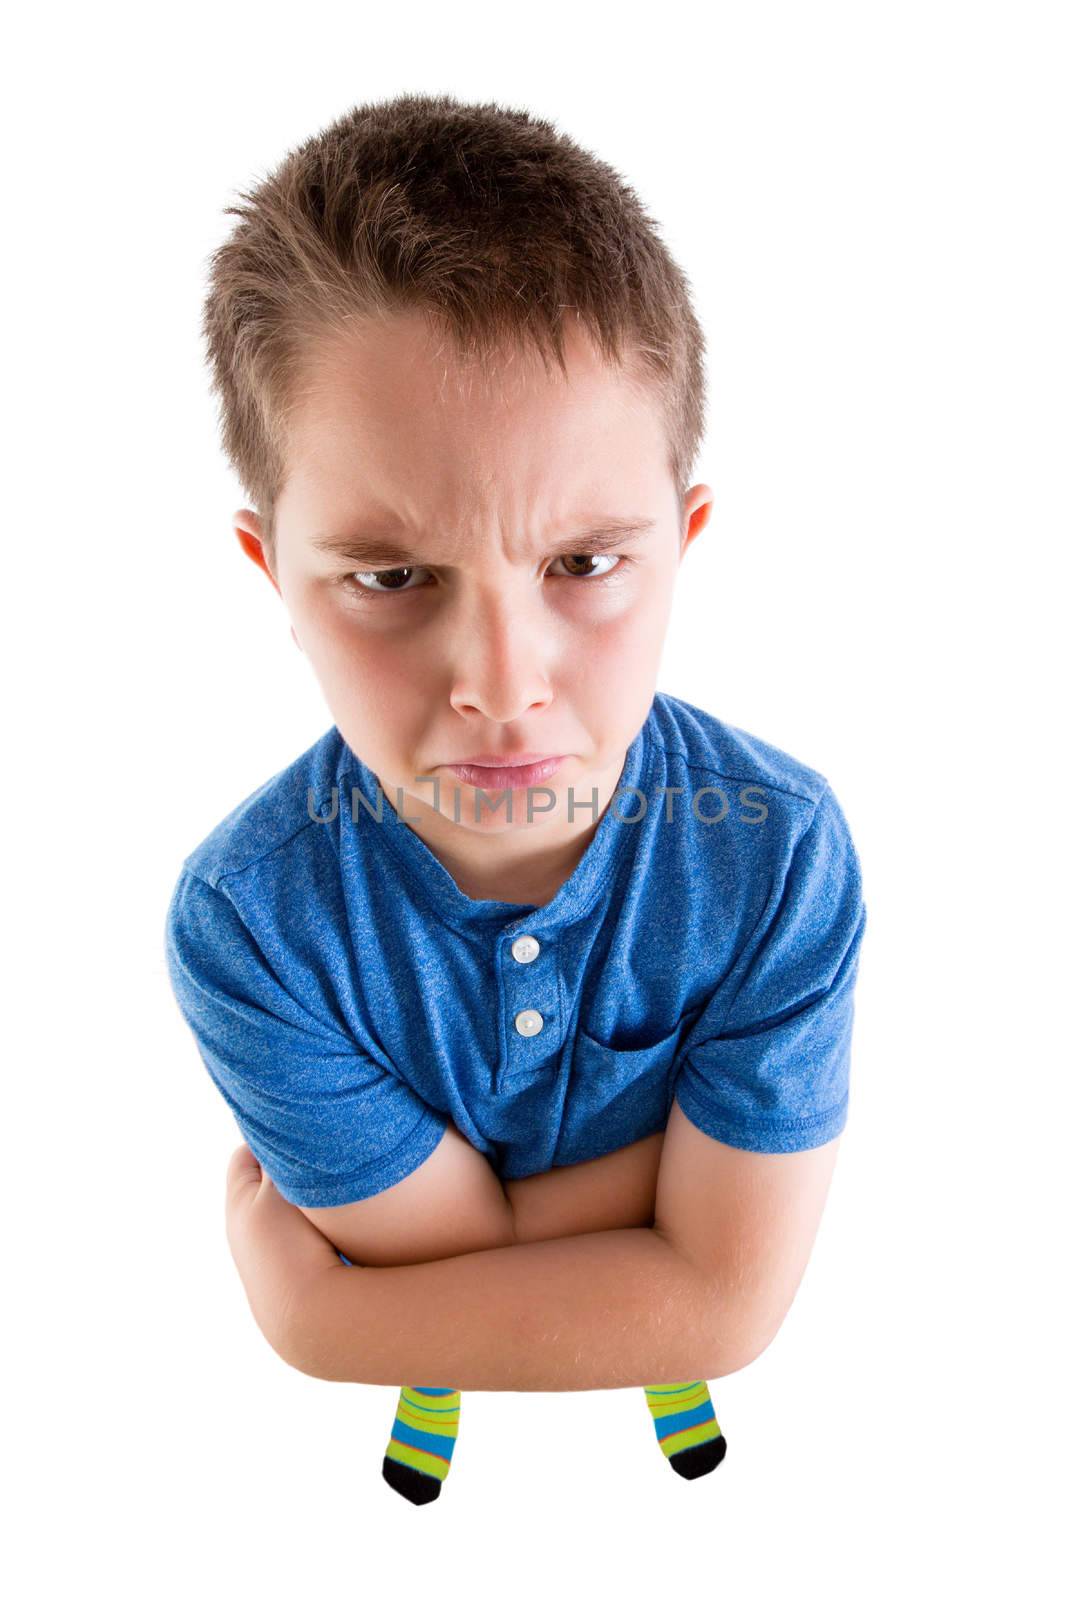 Young Boy Looking at the Camera From High Angle View with Mean Facial Expression. Isolated on White Background.